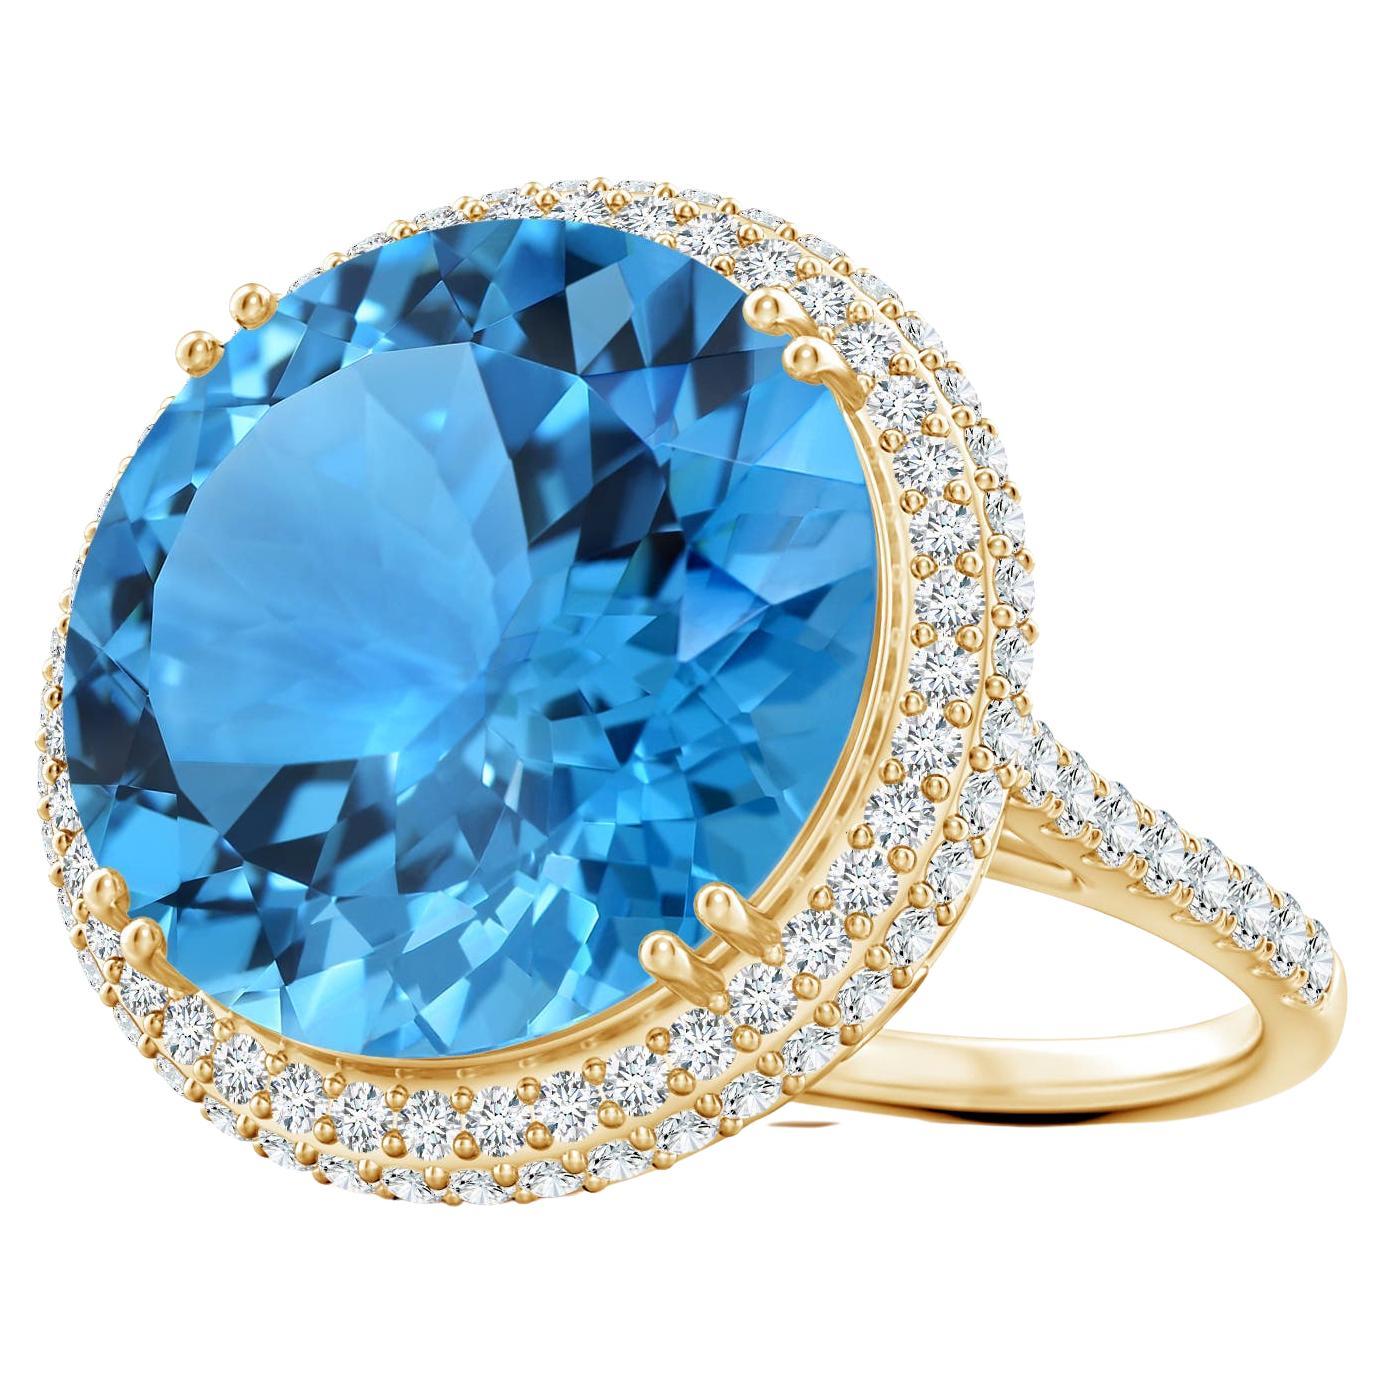 For Sale:  Angara Gia Certified Swiss Blue Topaz Double Halo Ring in Yellow Gold